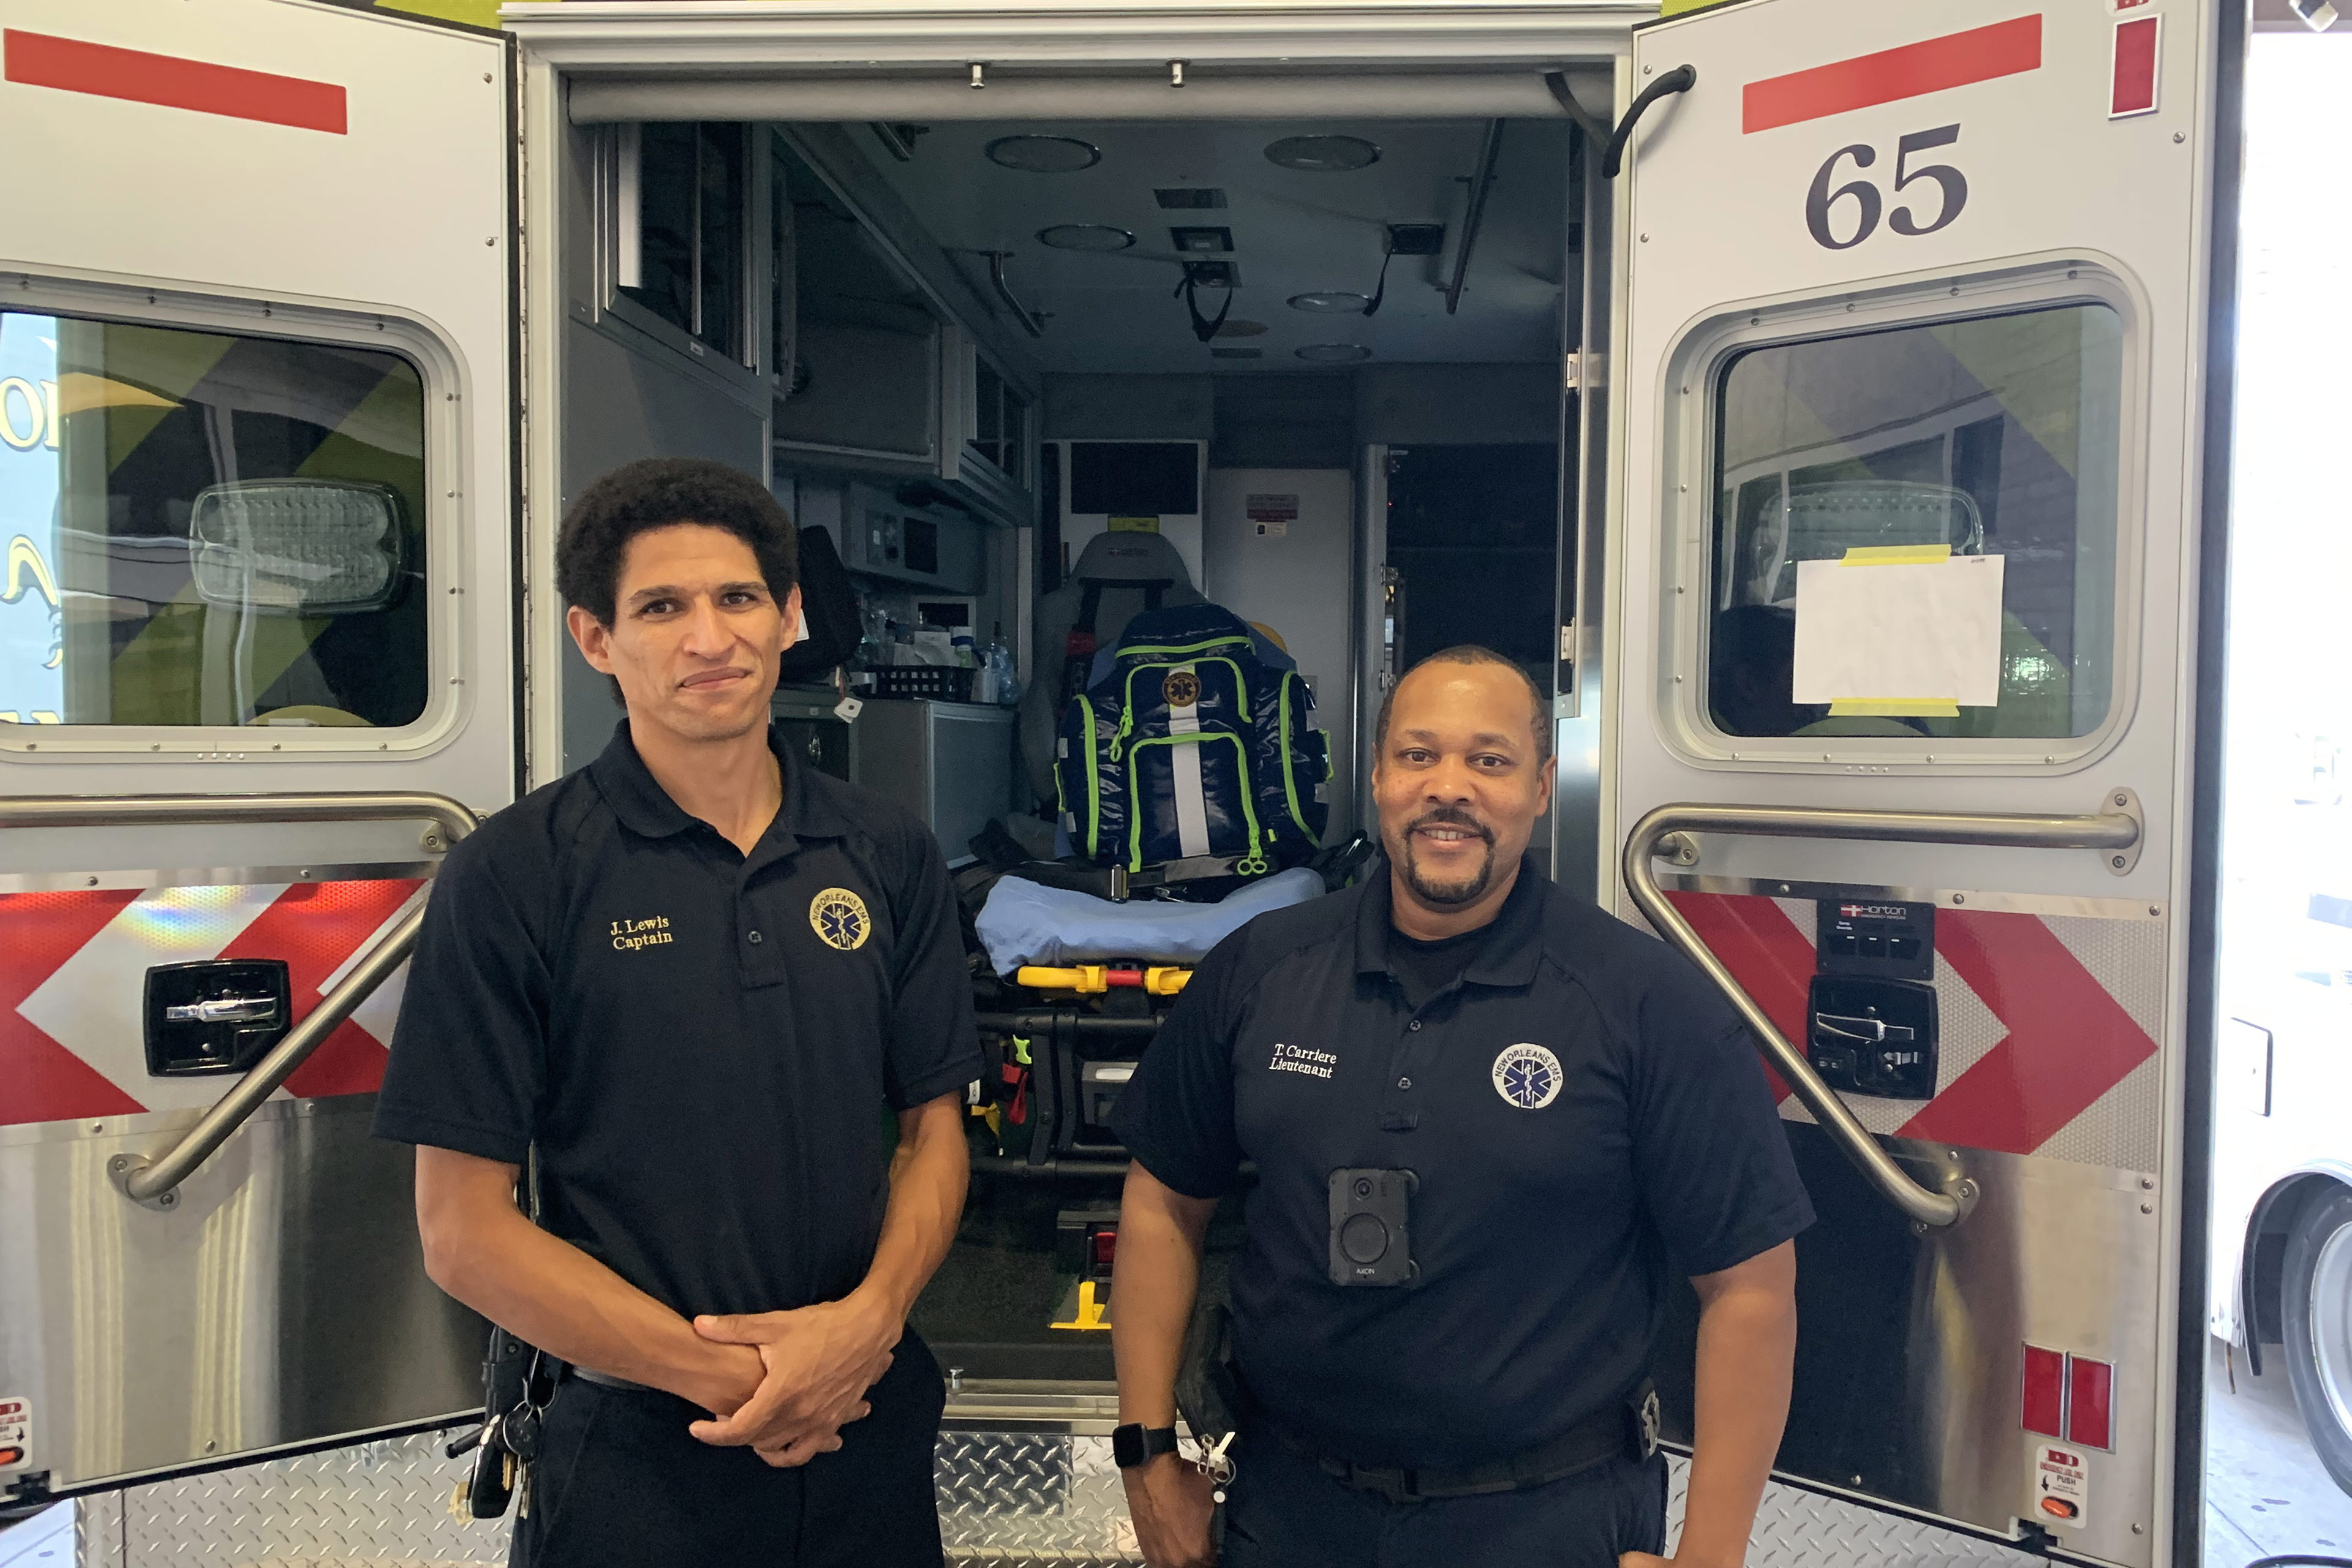 A photo of two emergency medical professionals standing in front of an ambulance.